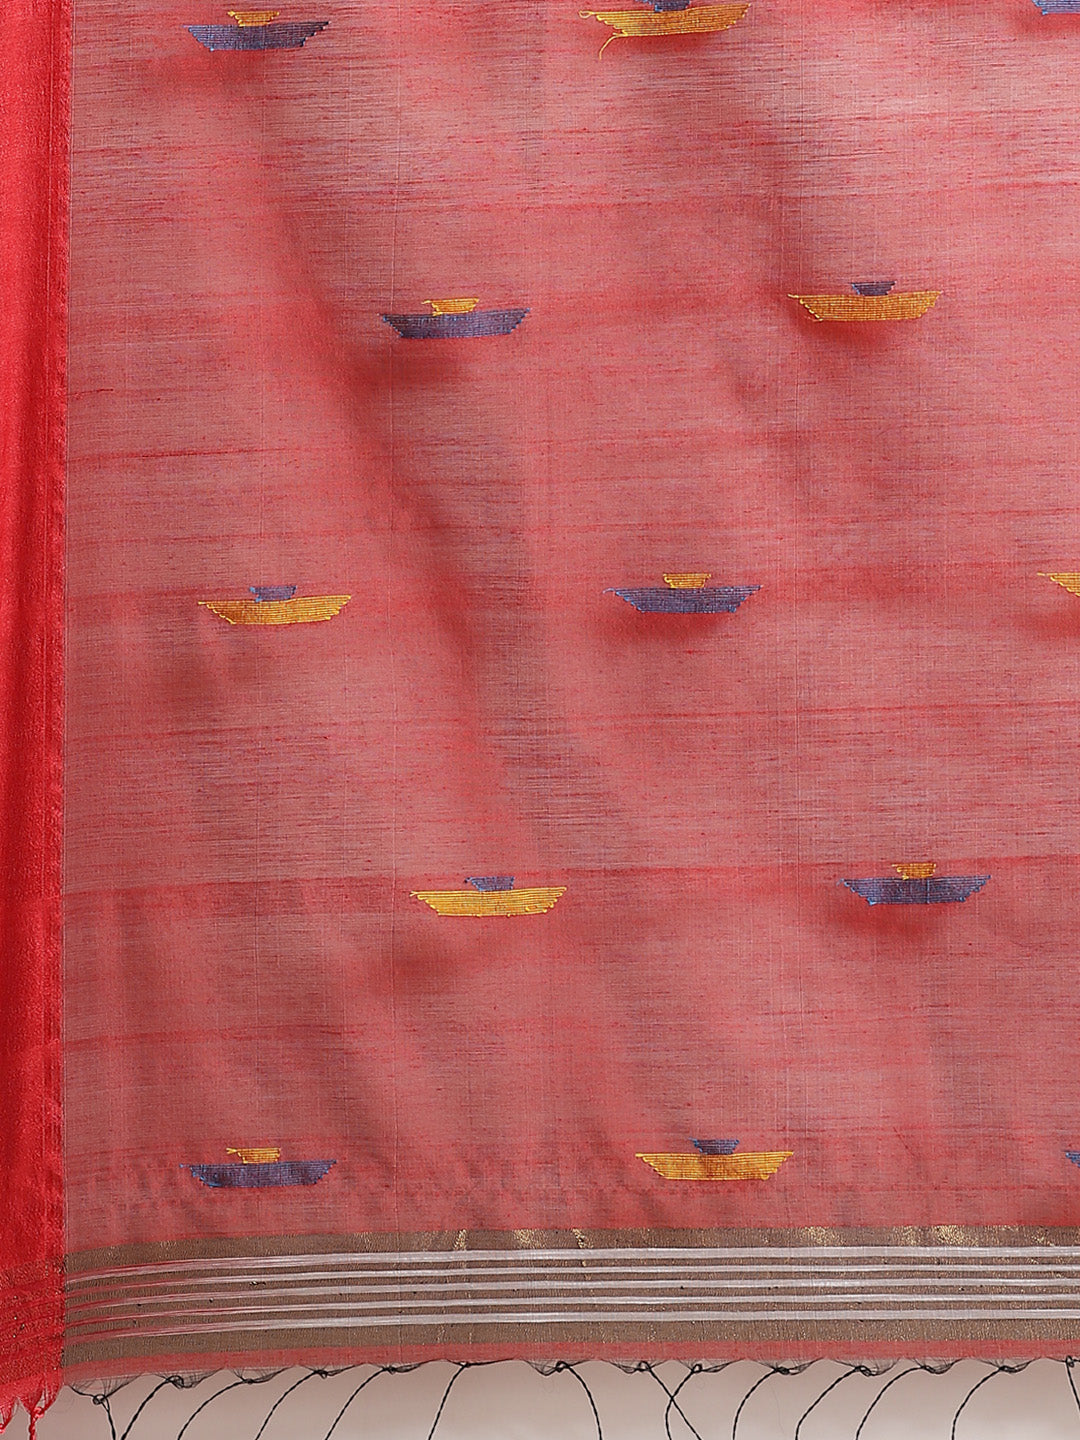 Grey and Red, Kalakari India Cotton Silk Grey Hand crafted saree with blouse SHBESA0008-Saree-Kalakari India-SHBESA0008-Bengal, Cotton, Geographical Indication, Hand Crafted, Heritage Prints, Ikkat, Natural Dyes, Red, Sarees, Sustainable Fabrics, Woven, Yellow-[Linen,Ethnic,wear,Fashionista,Handloom,Handicraft,Indigo,blockprint,block,print,Cotton,Chanderi,Blue, latest,classy,party,bollywood,trendy,summer,style,traditional,formal,elegant,unique,style,hand,block,print, dabu,booti,gift,present,glam